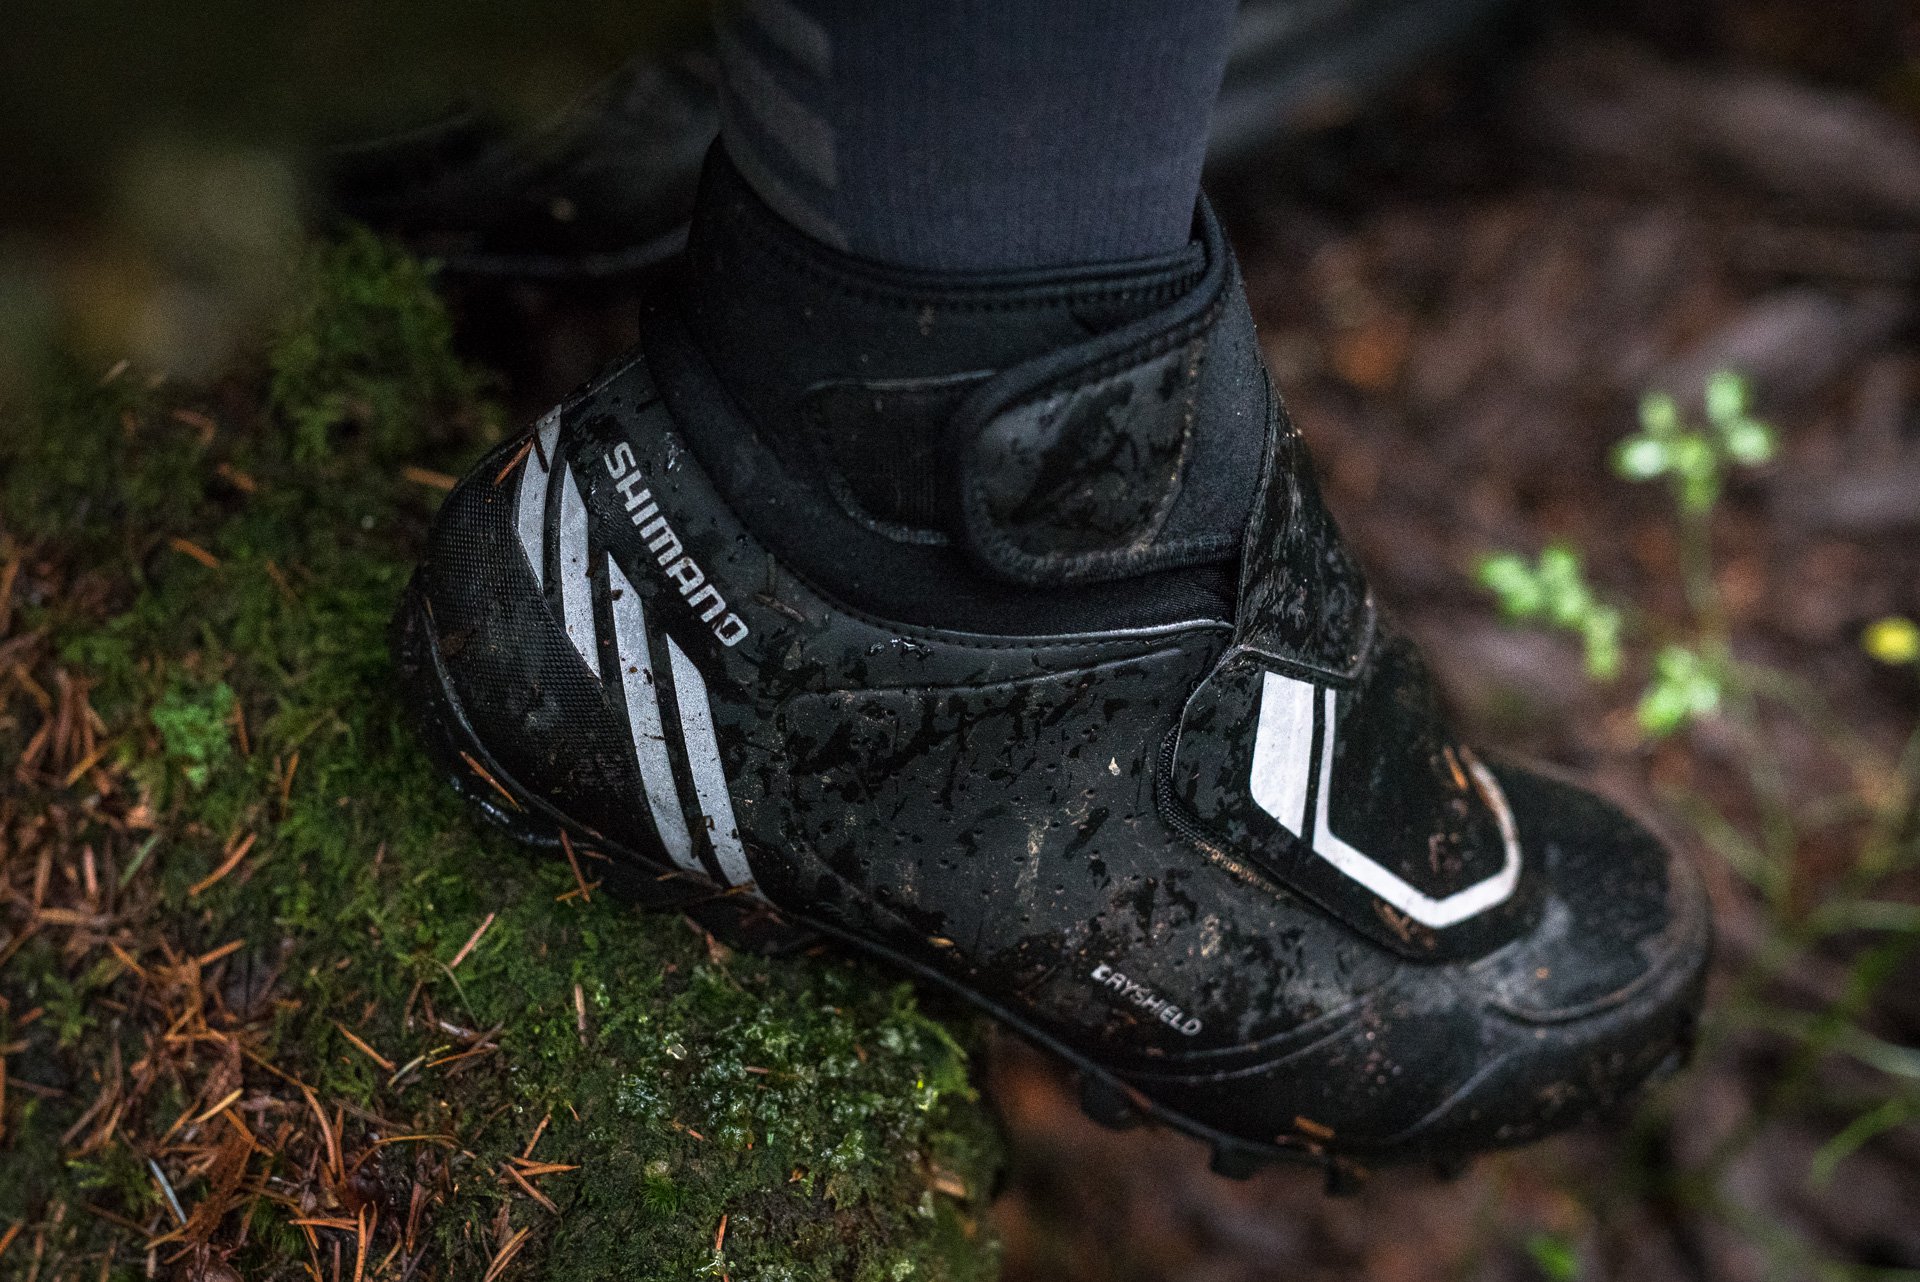 Shimano MW5 Winter Shoes Reviewed